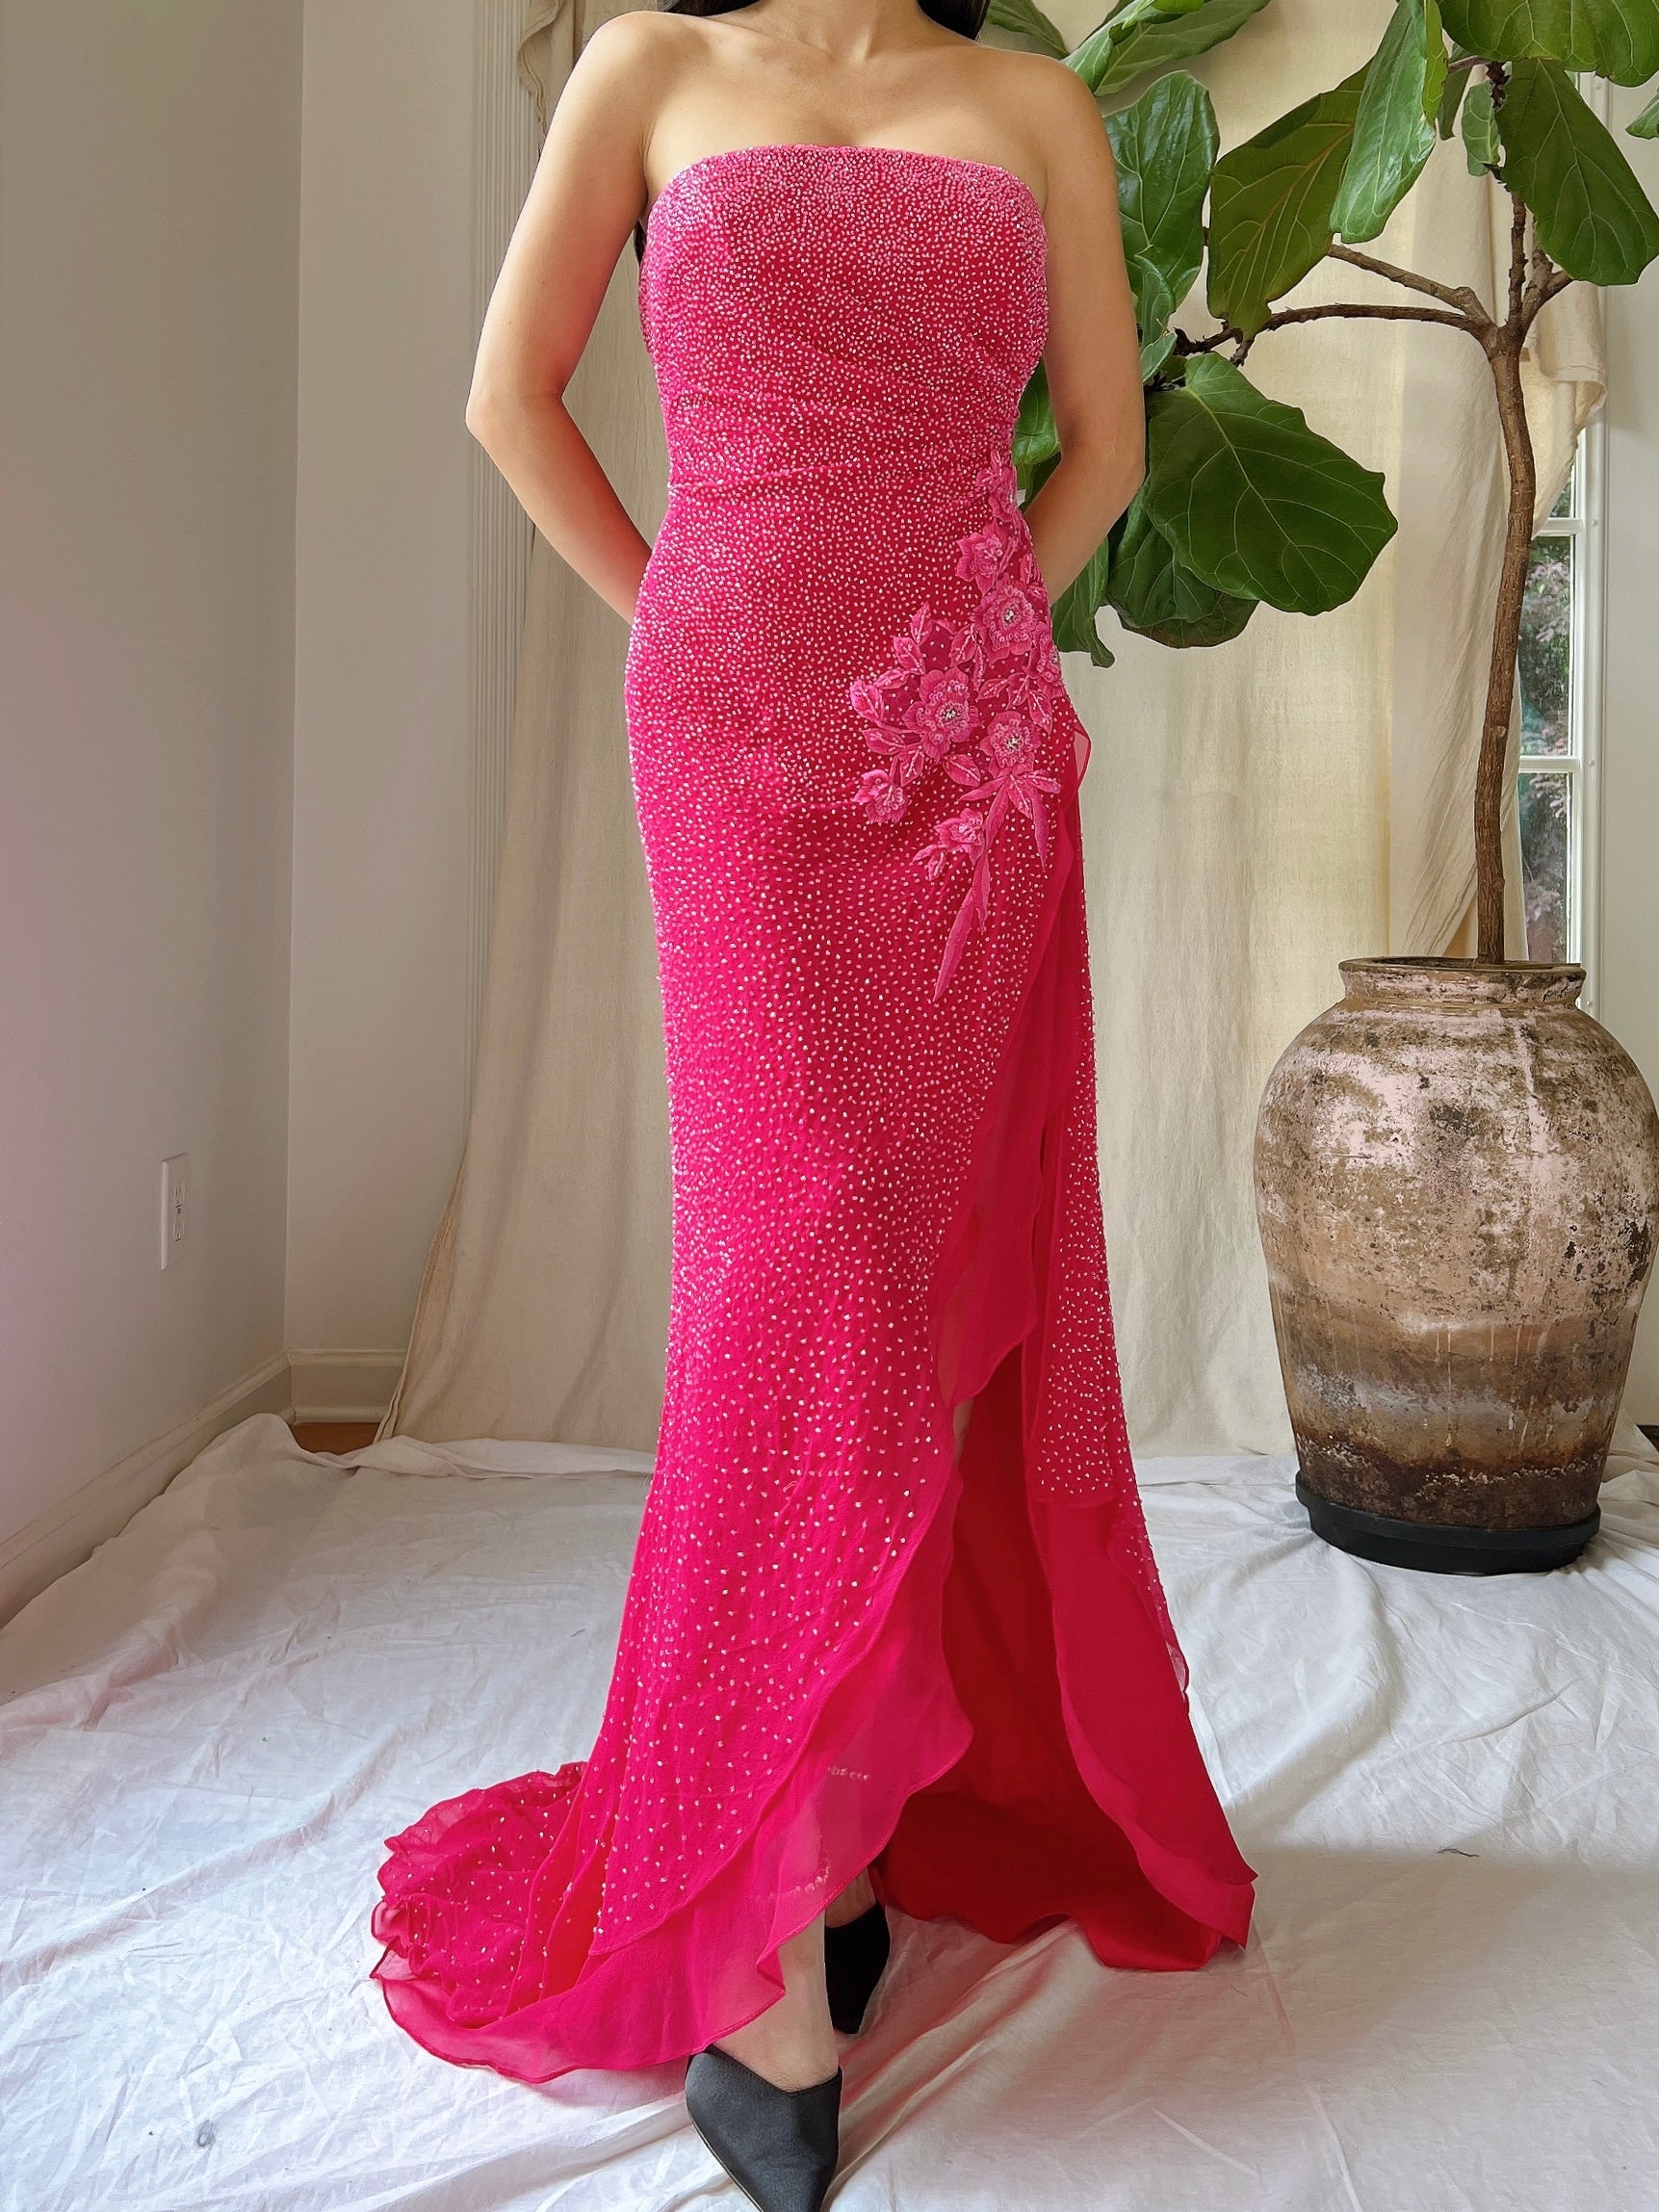 1990s Silk Strapless Beaded Gown - S